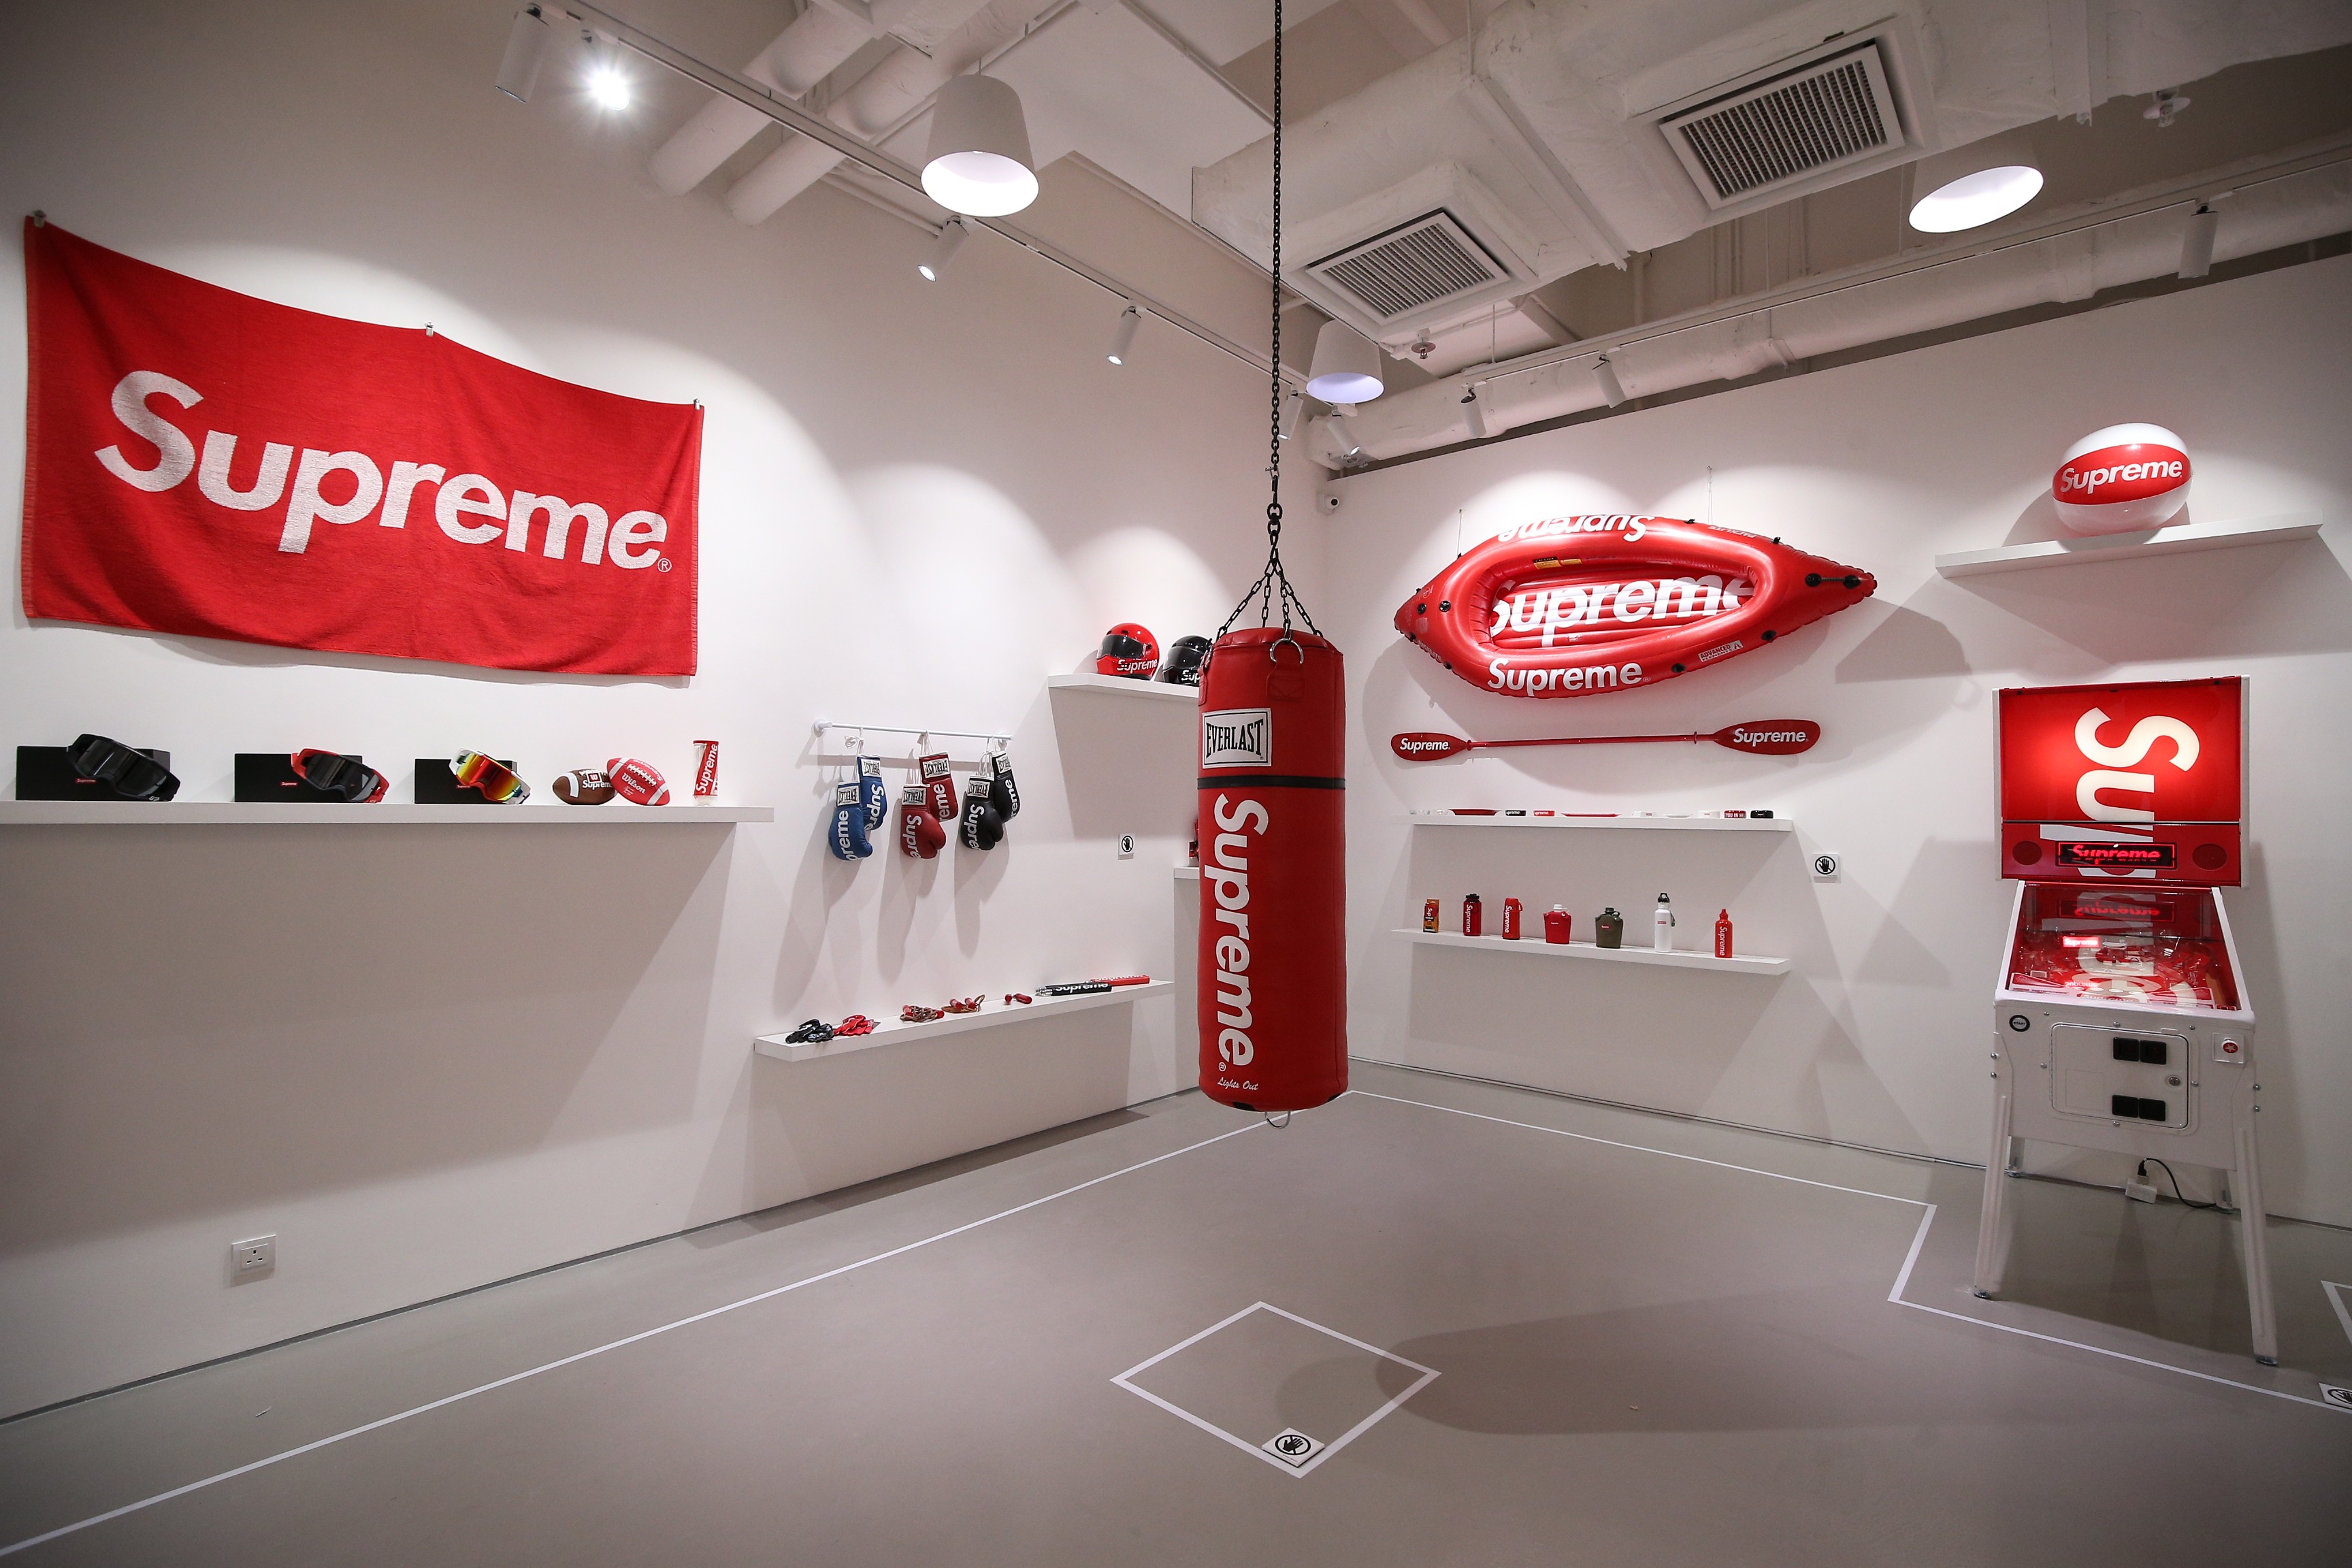 Sotheby's is auctioning a massive collection of Supreme products